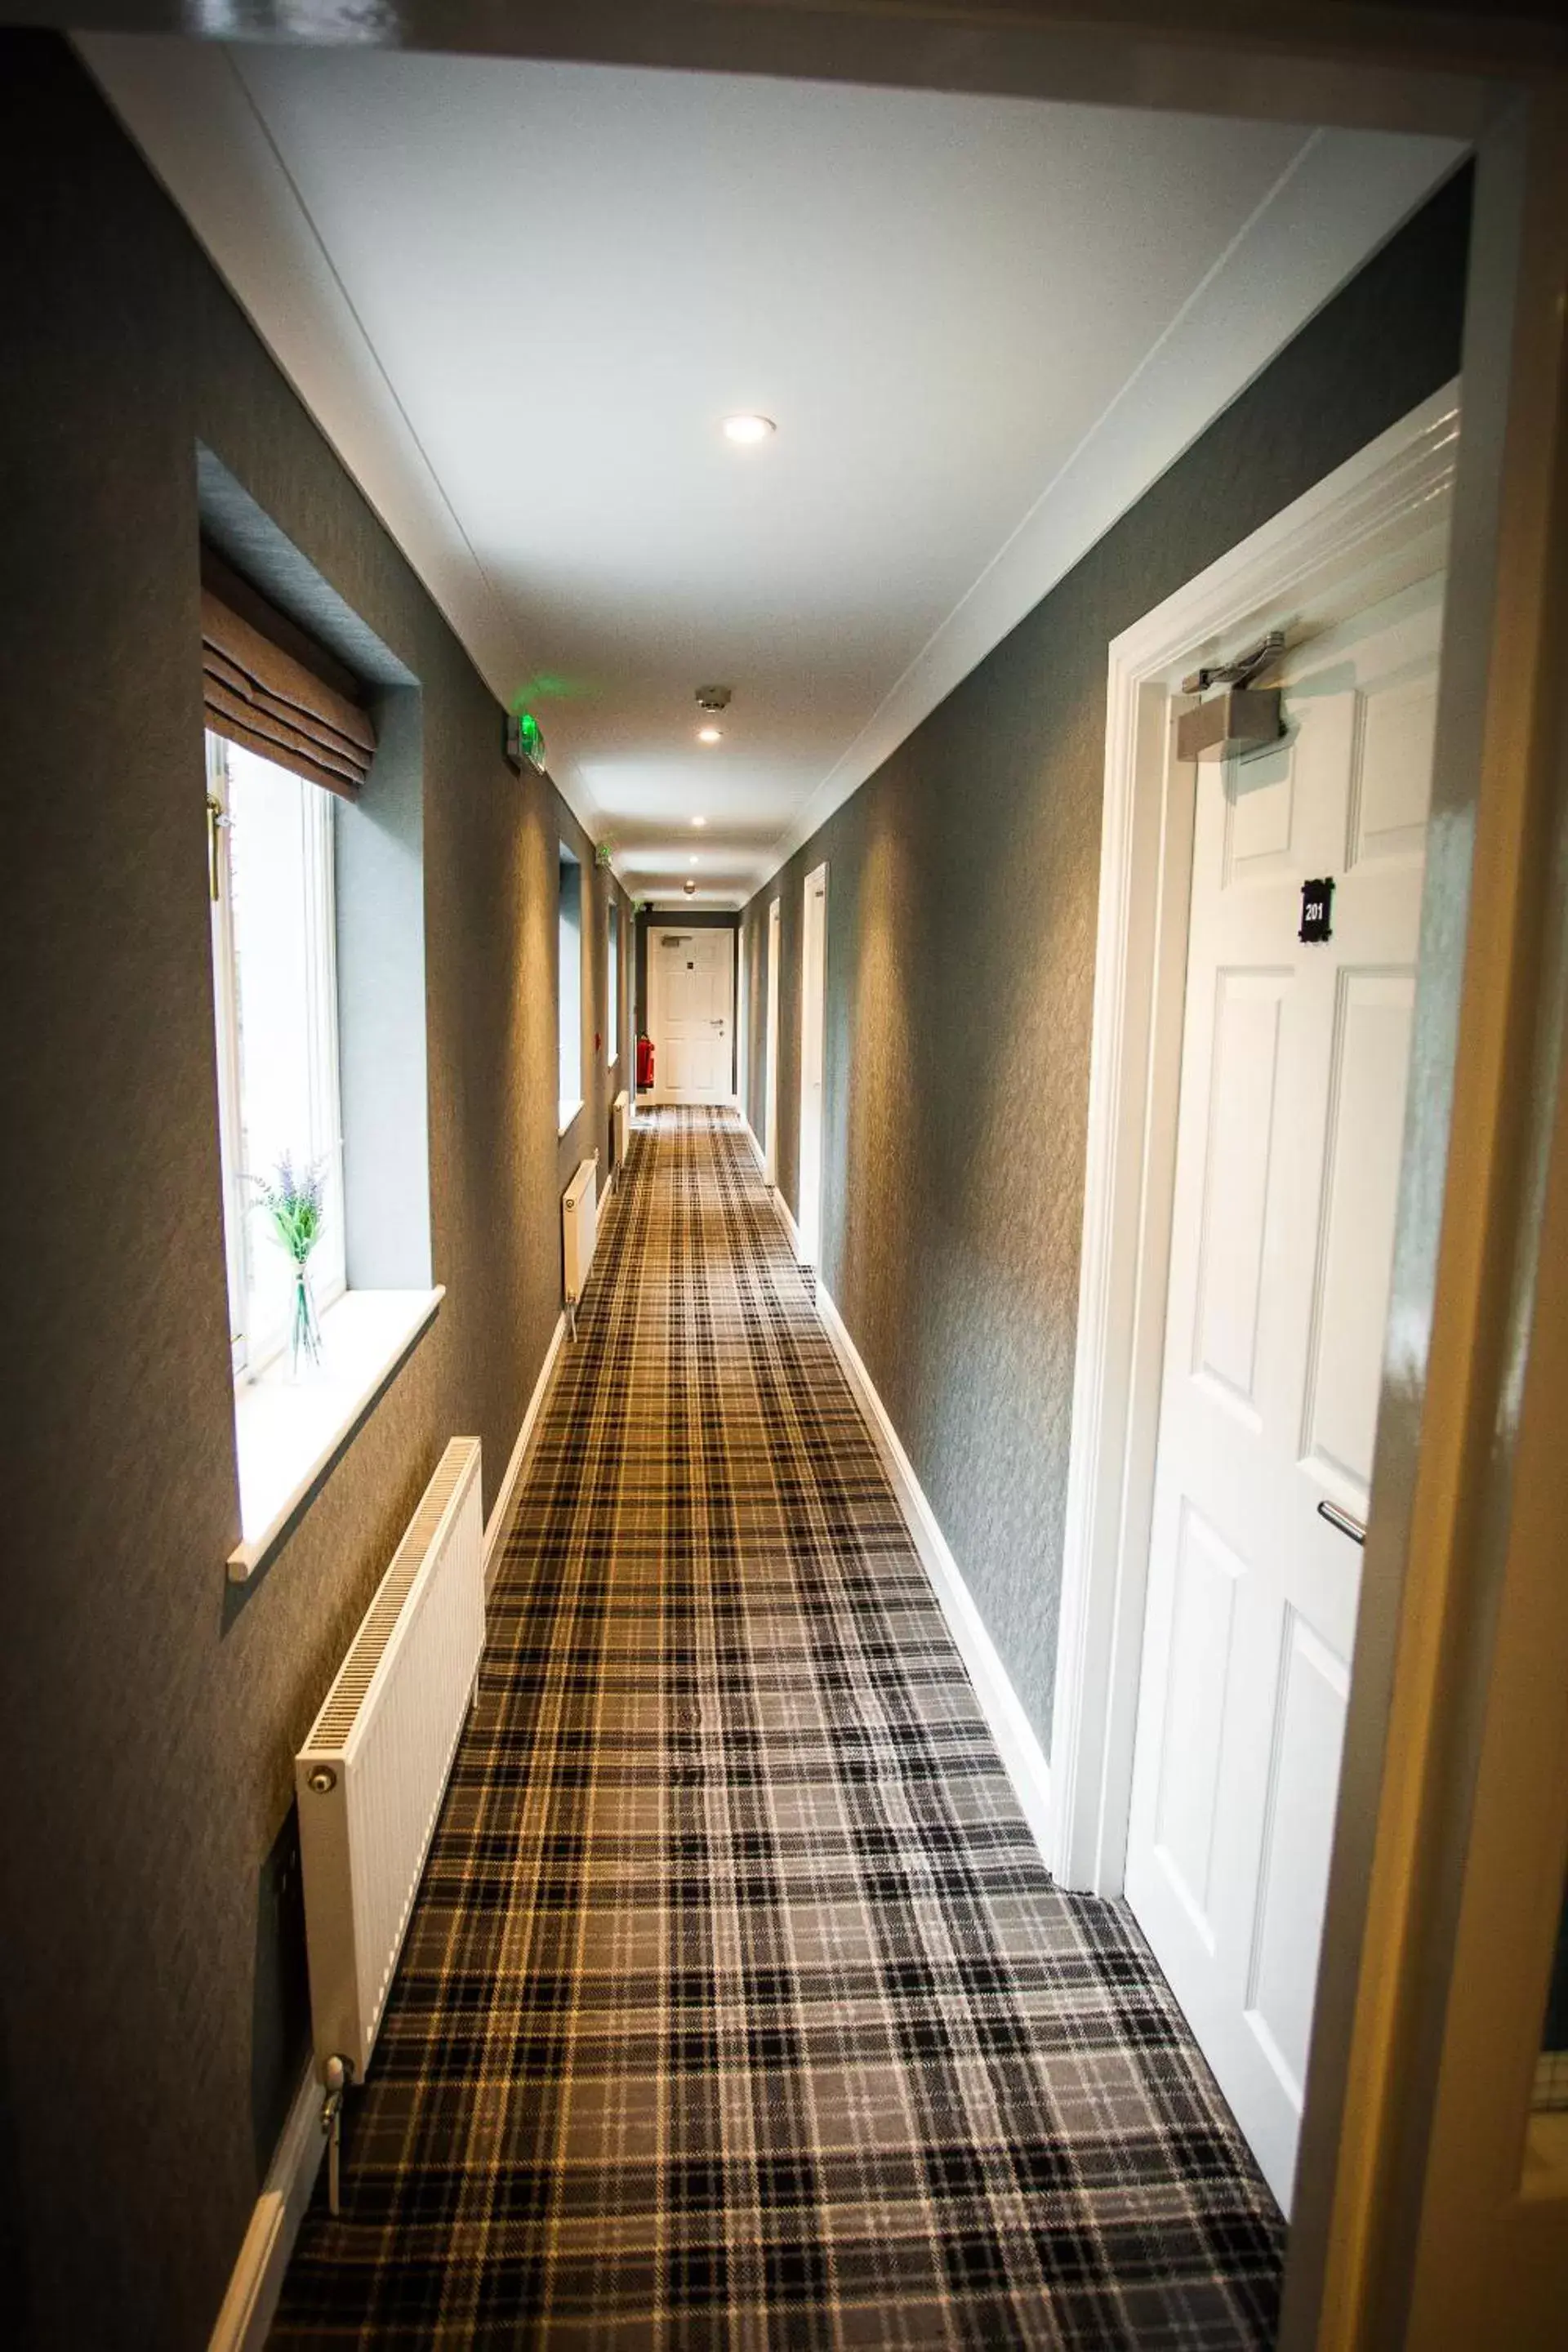 Area and facilities in Heywood Spa Hotel